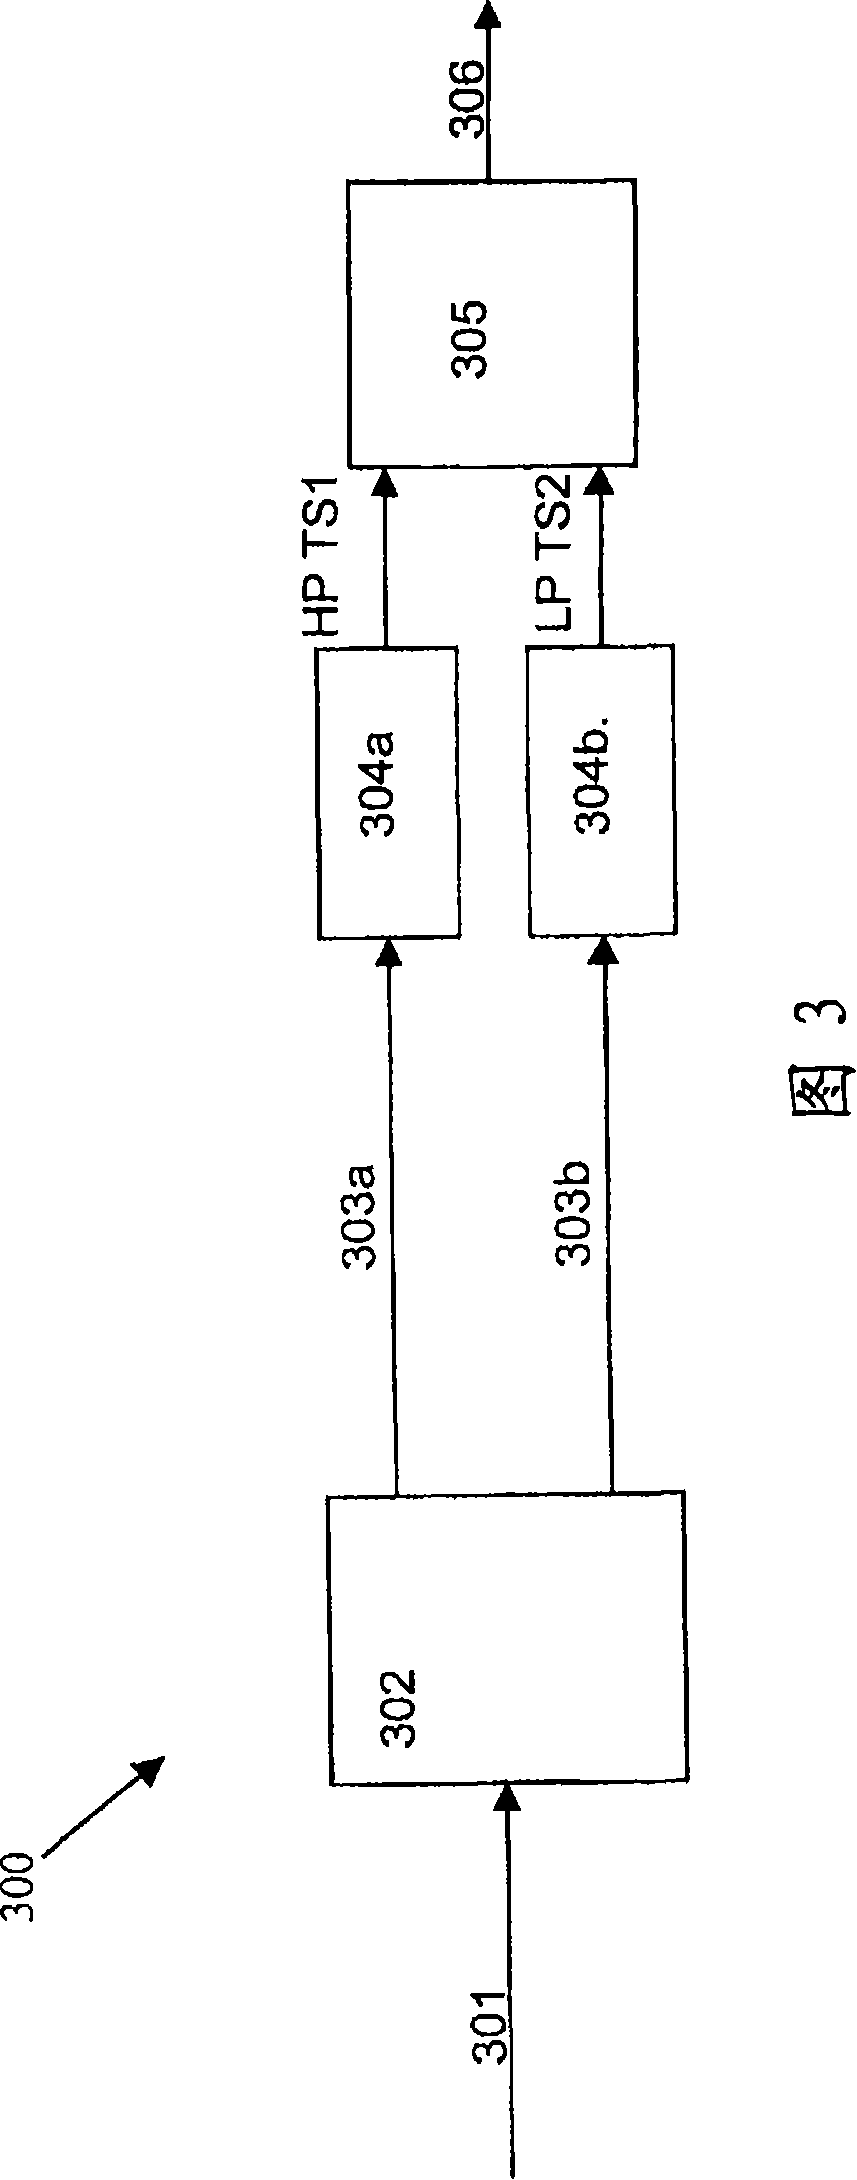 Method and apparatus for hierarchical transmission/reception in digital broadcast